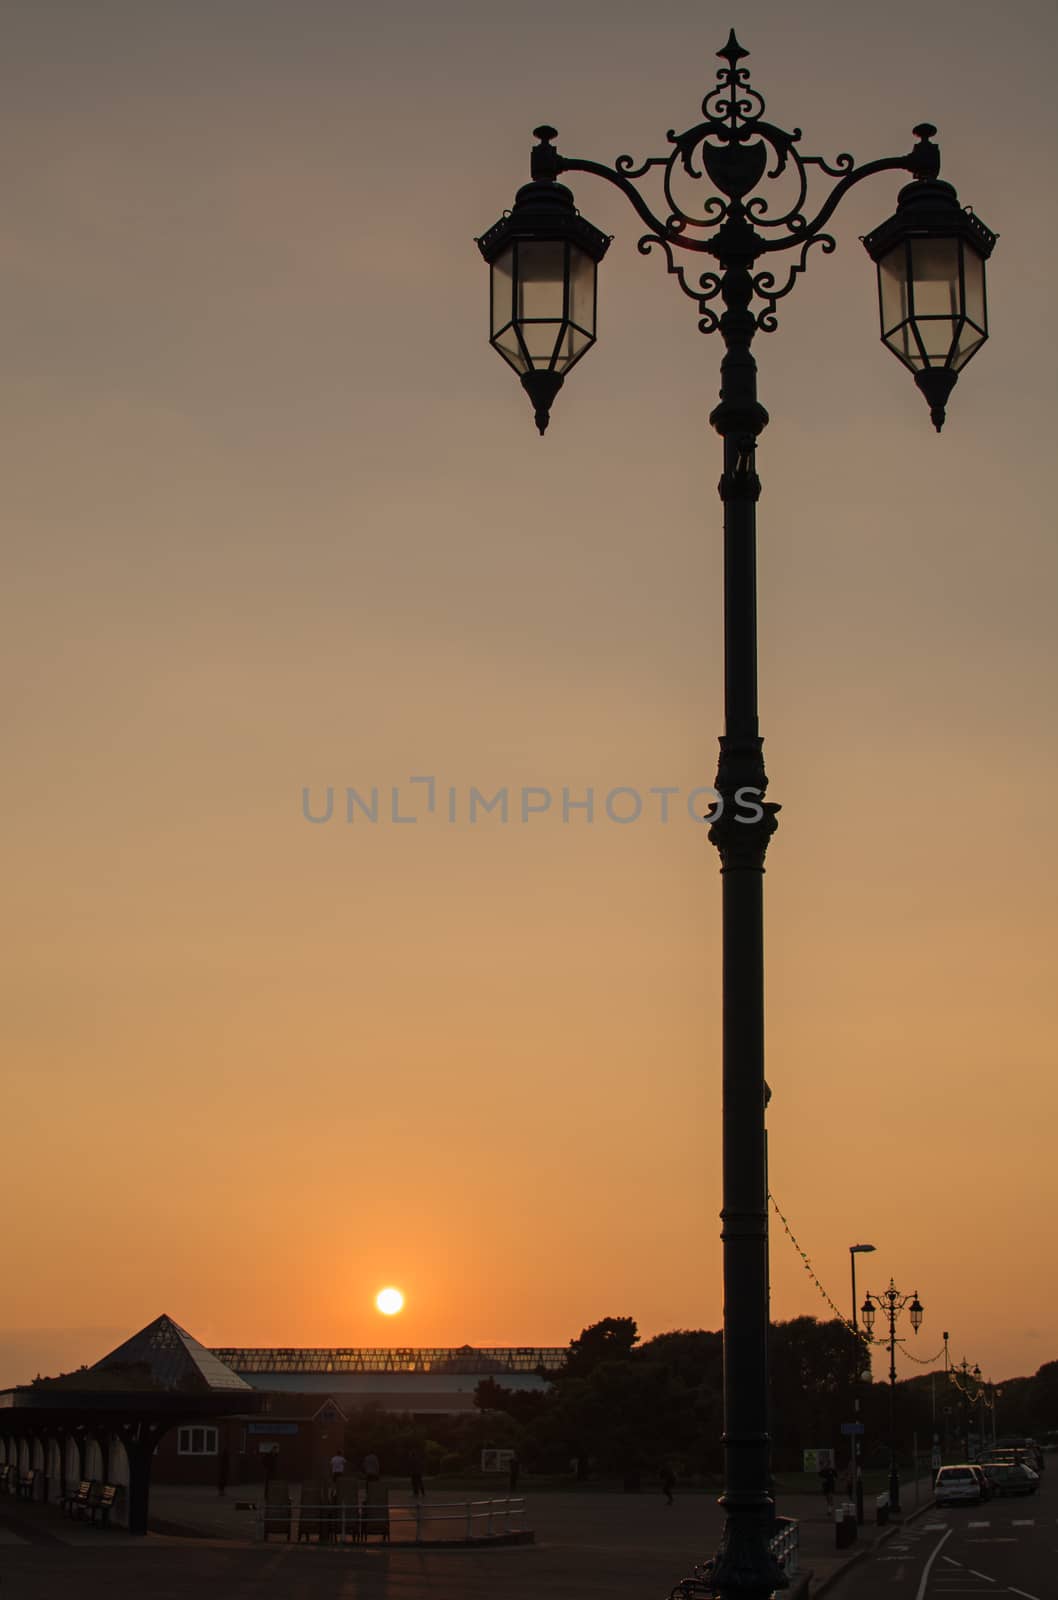 An ornate streetlamp, silhouetted against the setting sun